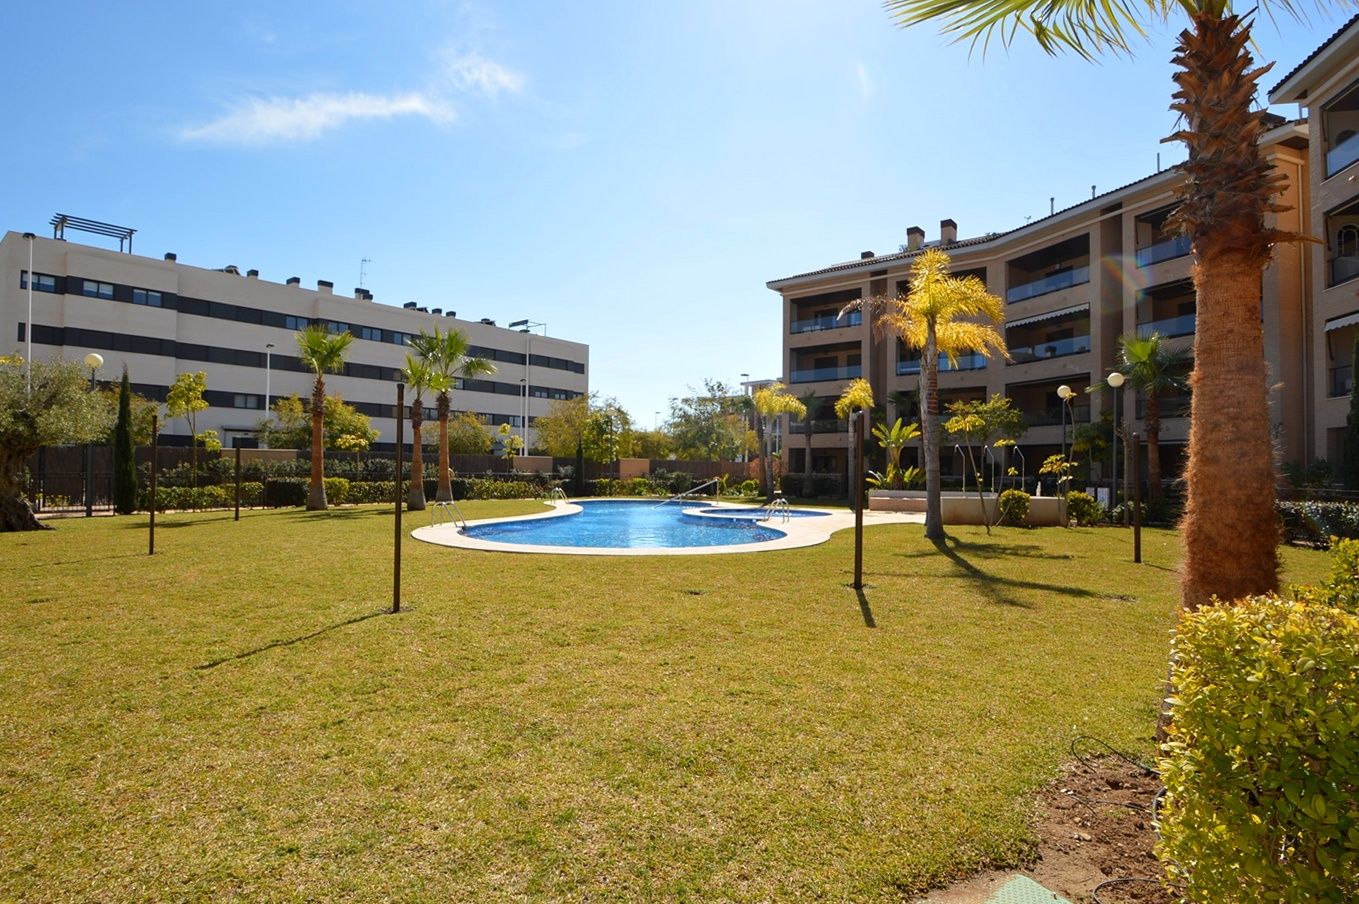 Duplex Penthouse Brisas del Arenal on the Arenal Beach